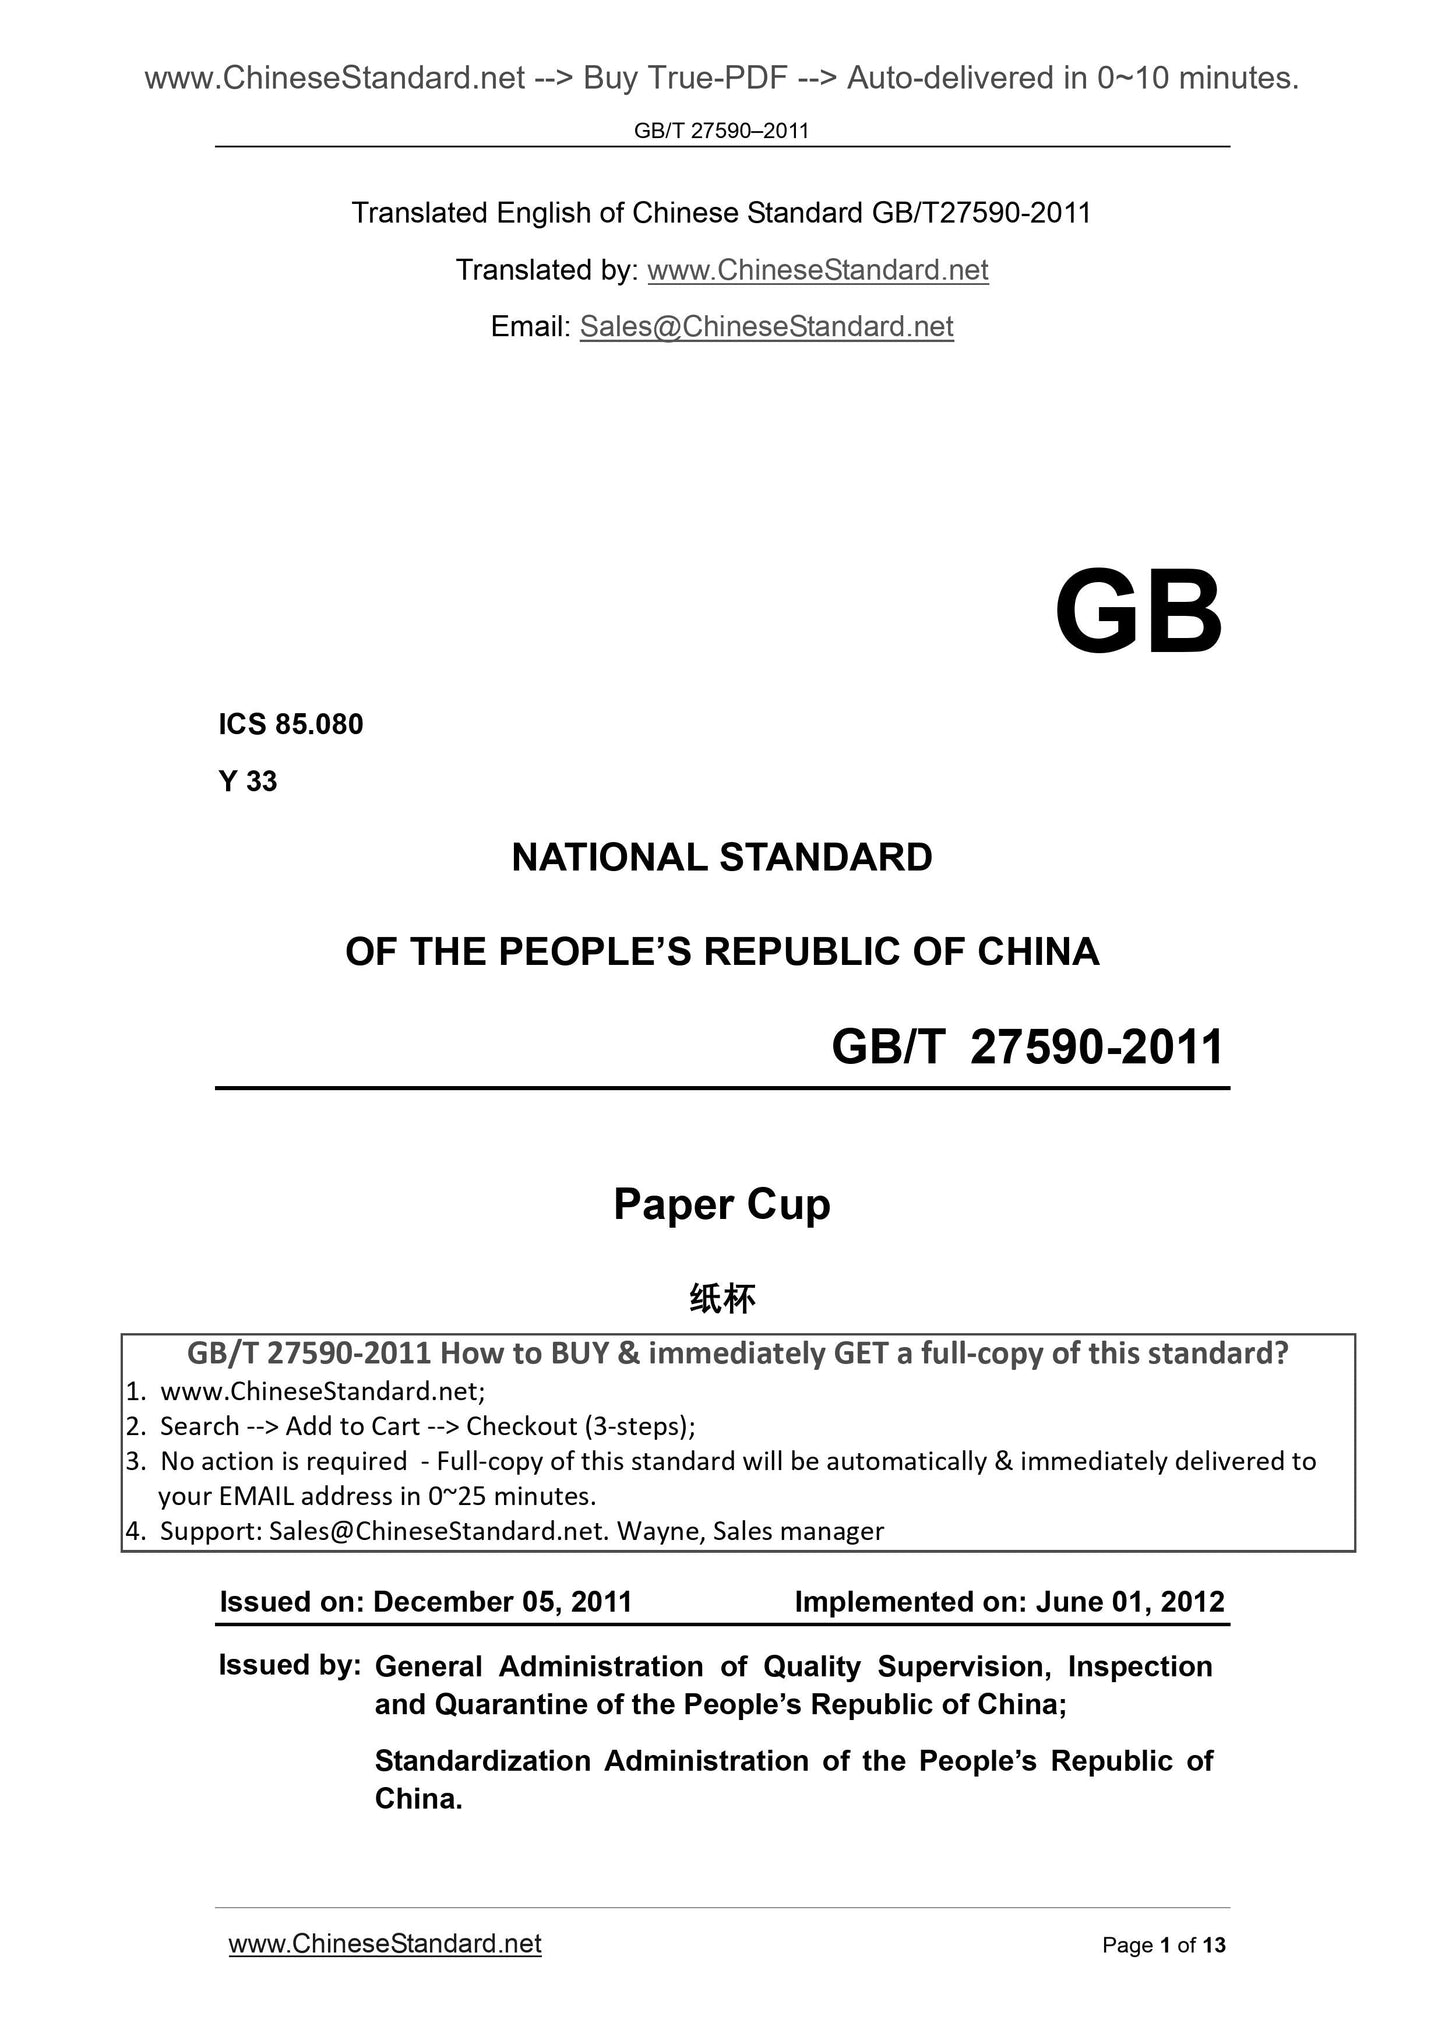 GB/T 27590-2011 Page 1